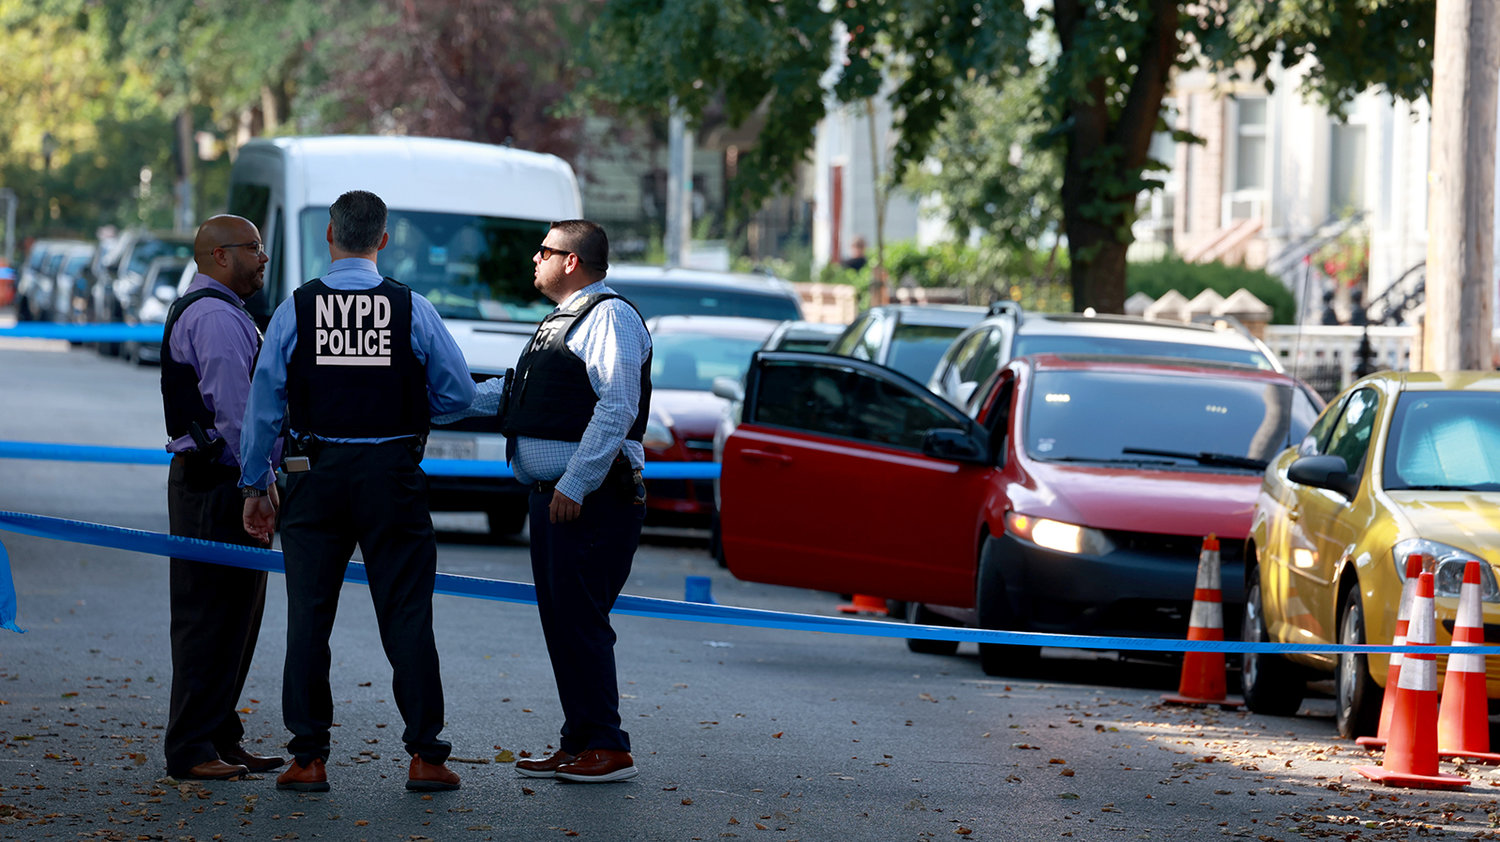 Detectives process the crime scene on North Henry Street where a man was shot while sitting on his car early Tuesday, July 19, 2022. (Luiz C. Ribeiro/New York Daily News/TNS)